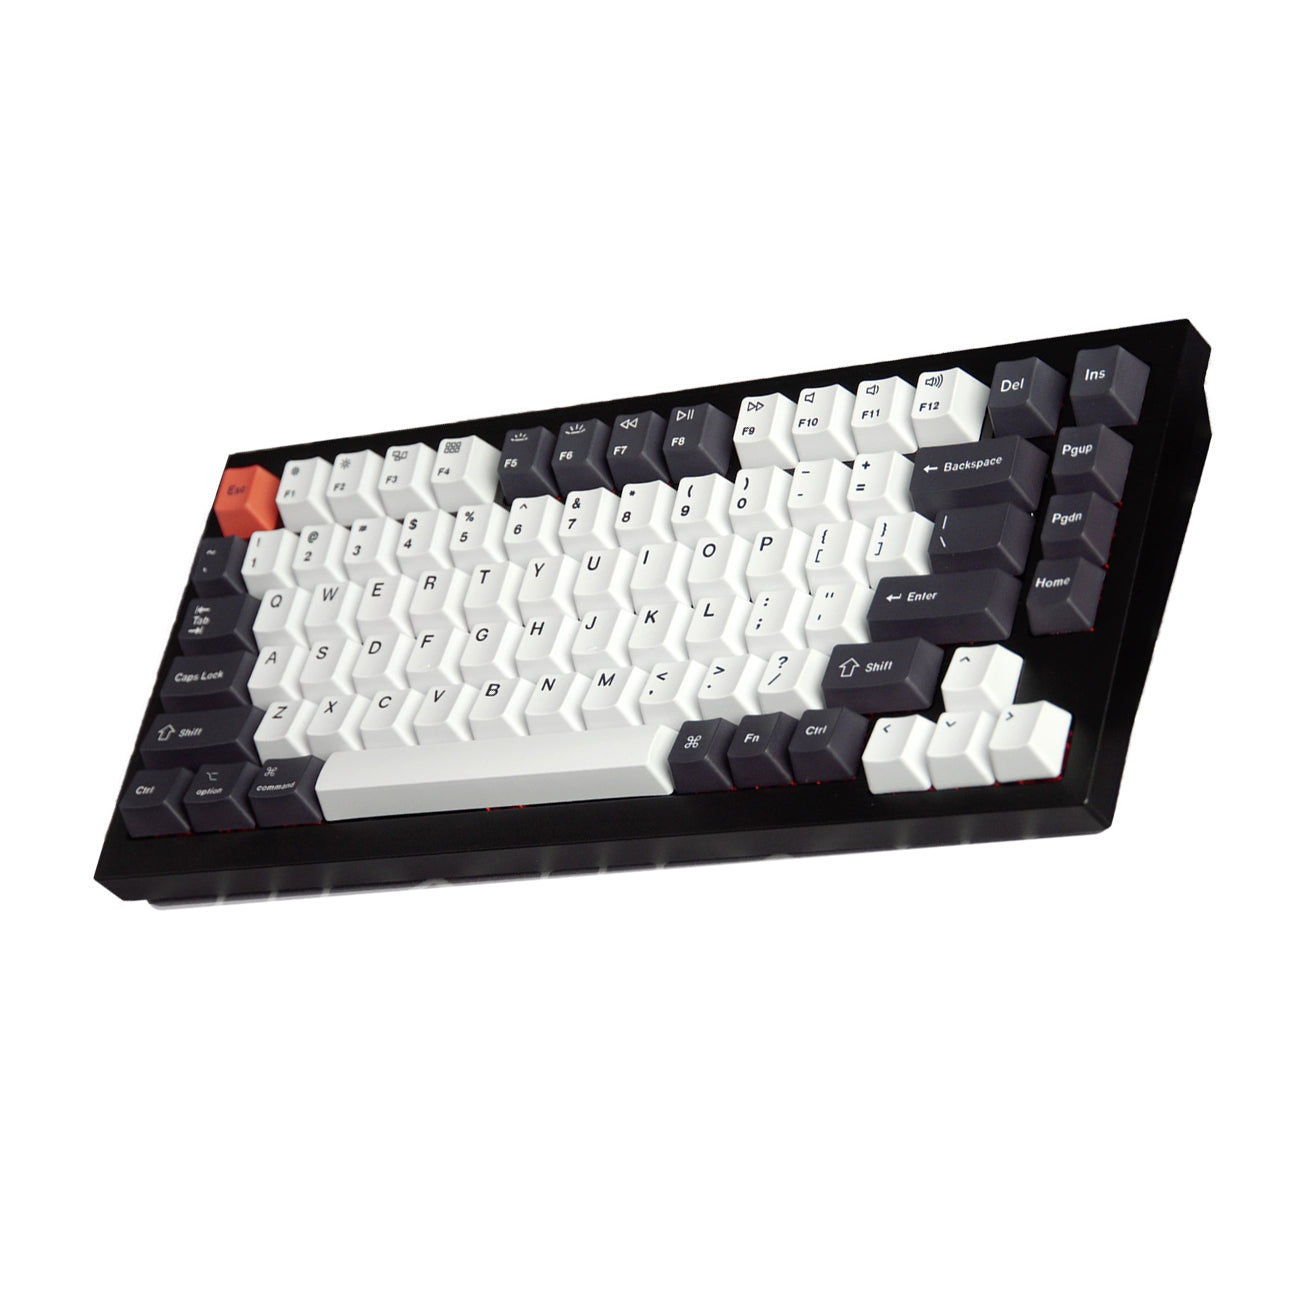 Keychron Q1 QMK 84 Keys Custom Compact Wired TKL Tenkeyless Mechanical Keyboard with RGB Backlight Full Aluminum, Hot Swappable Gateron G Pro Switches, and Programmable Knob (Carbon Black) (Red Linear, Blue Clicky, Brown Tactile) Q1C1 Q1C2 Q1C3